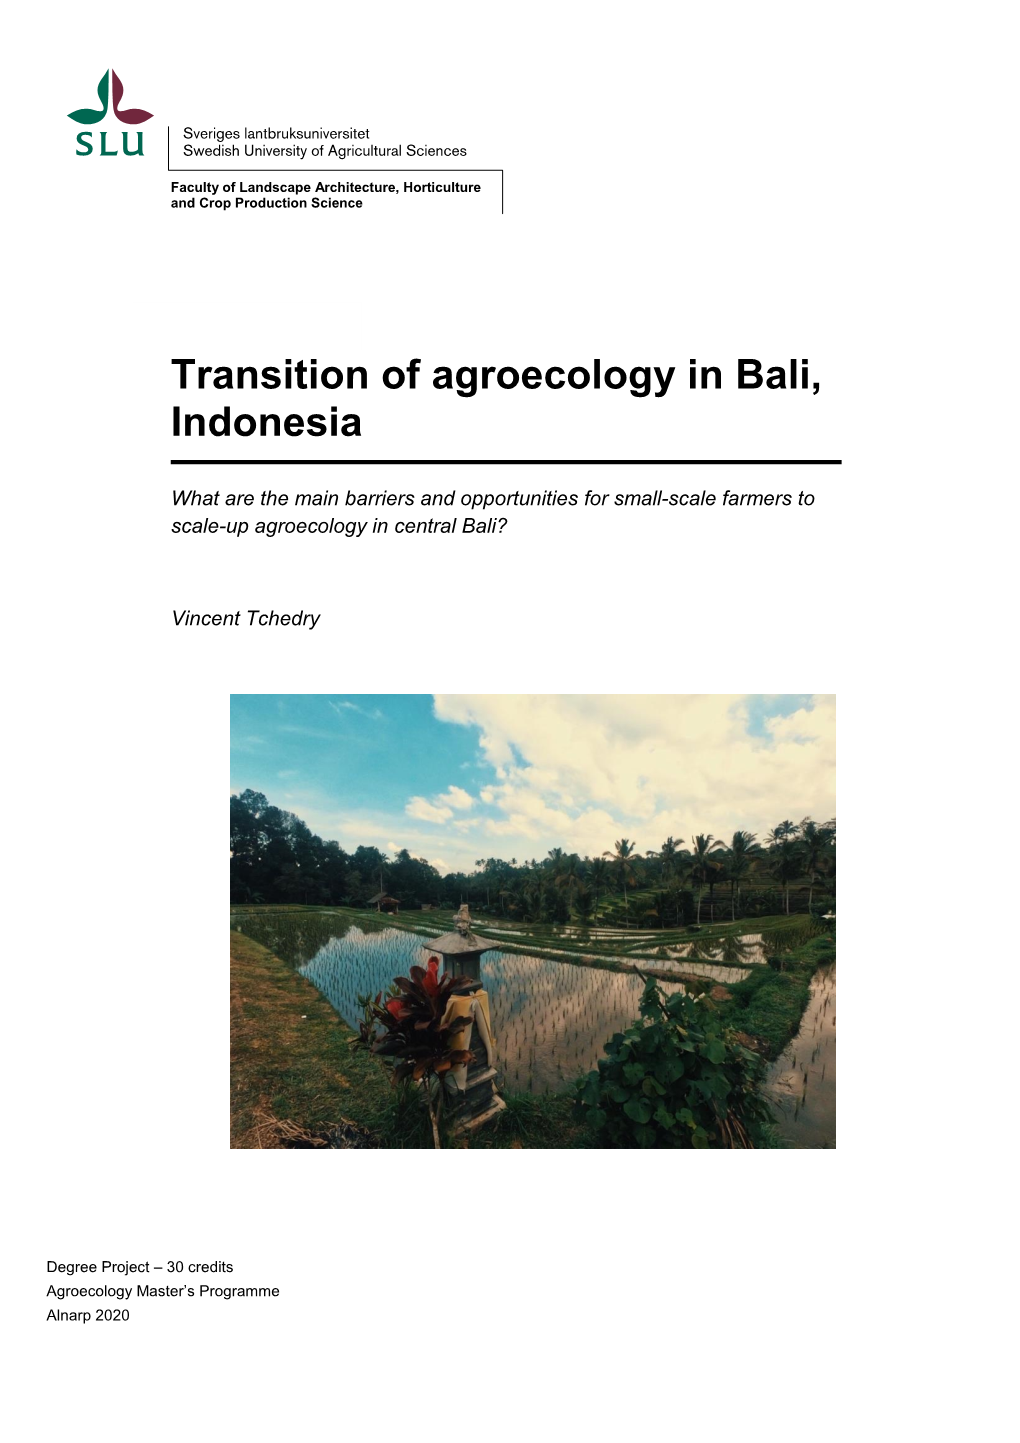 Transition of Agroecology in Bali, Indonesia